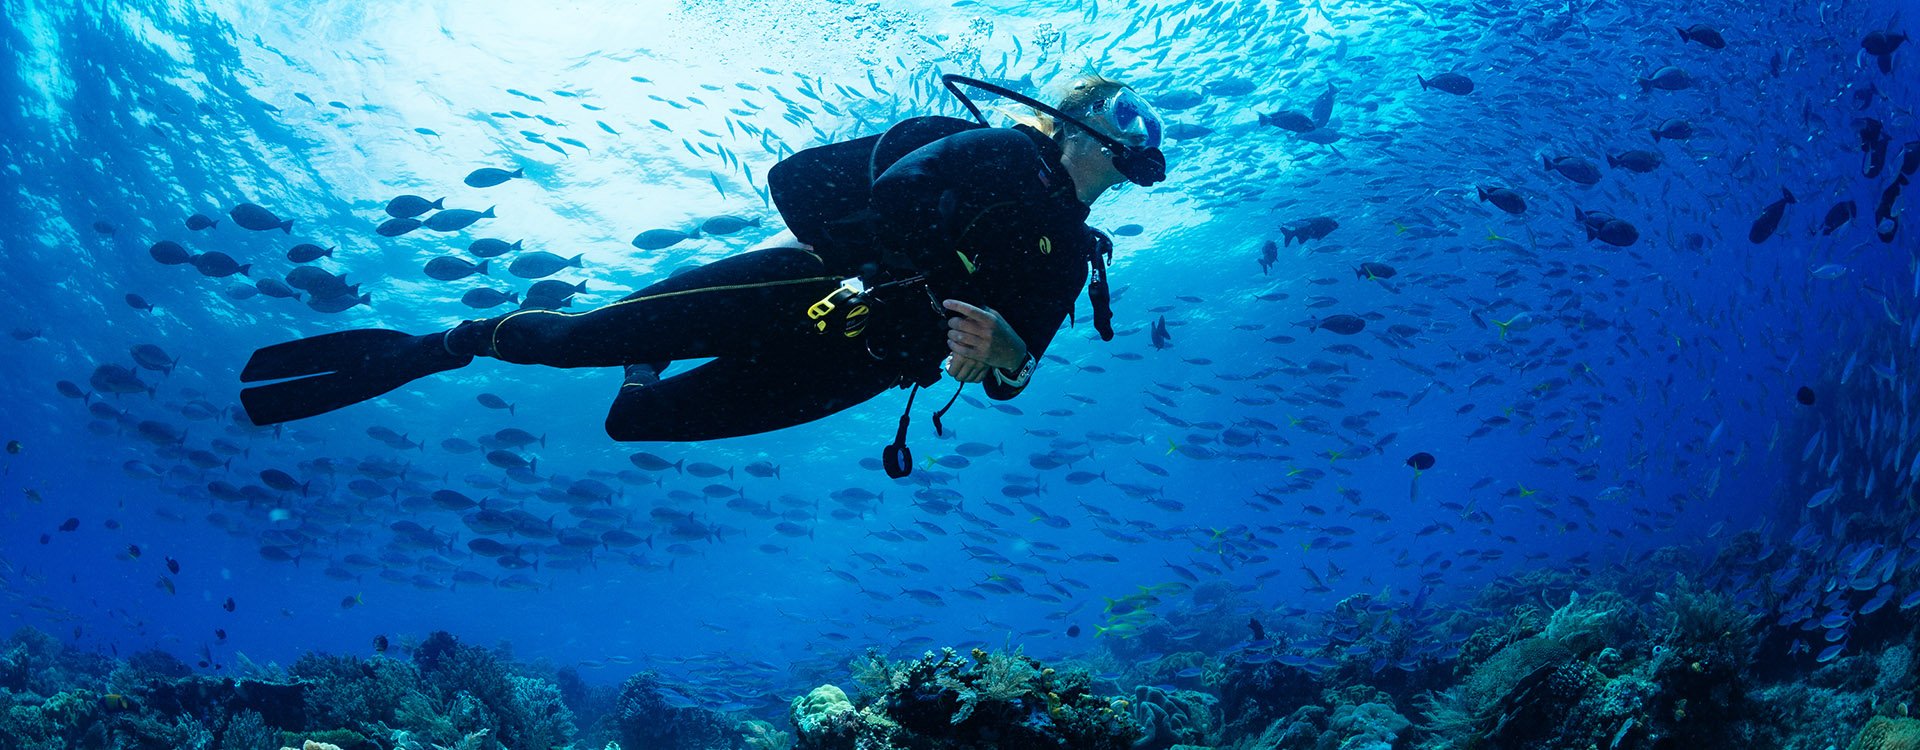 Girl Scuba Diver Diving on tropical reef